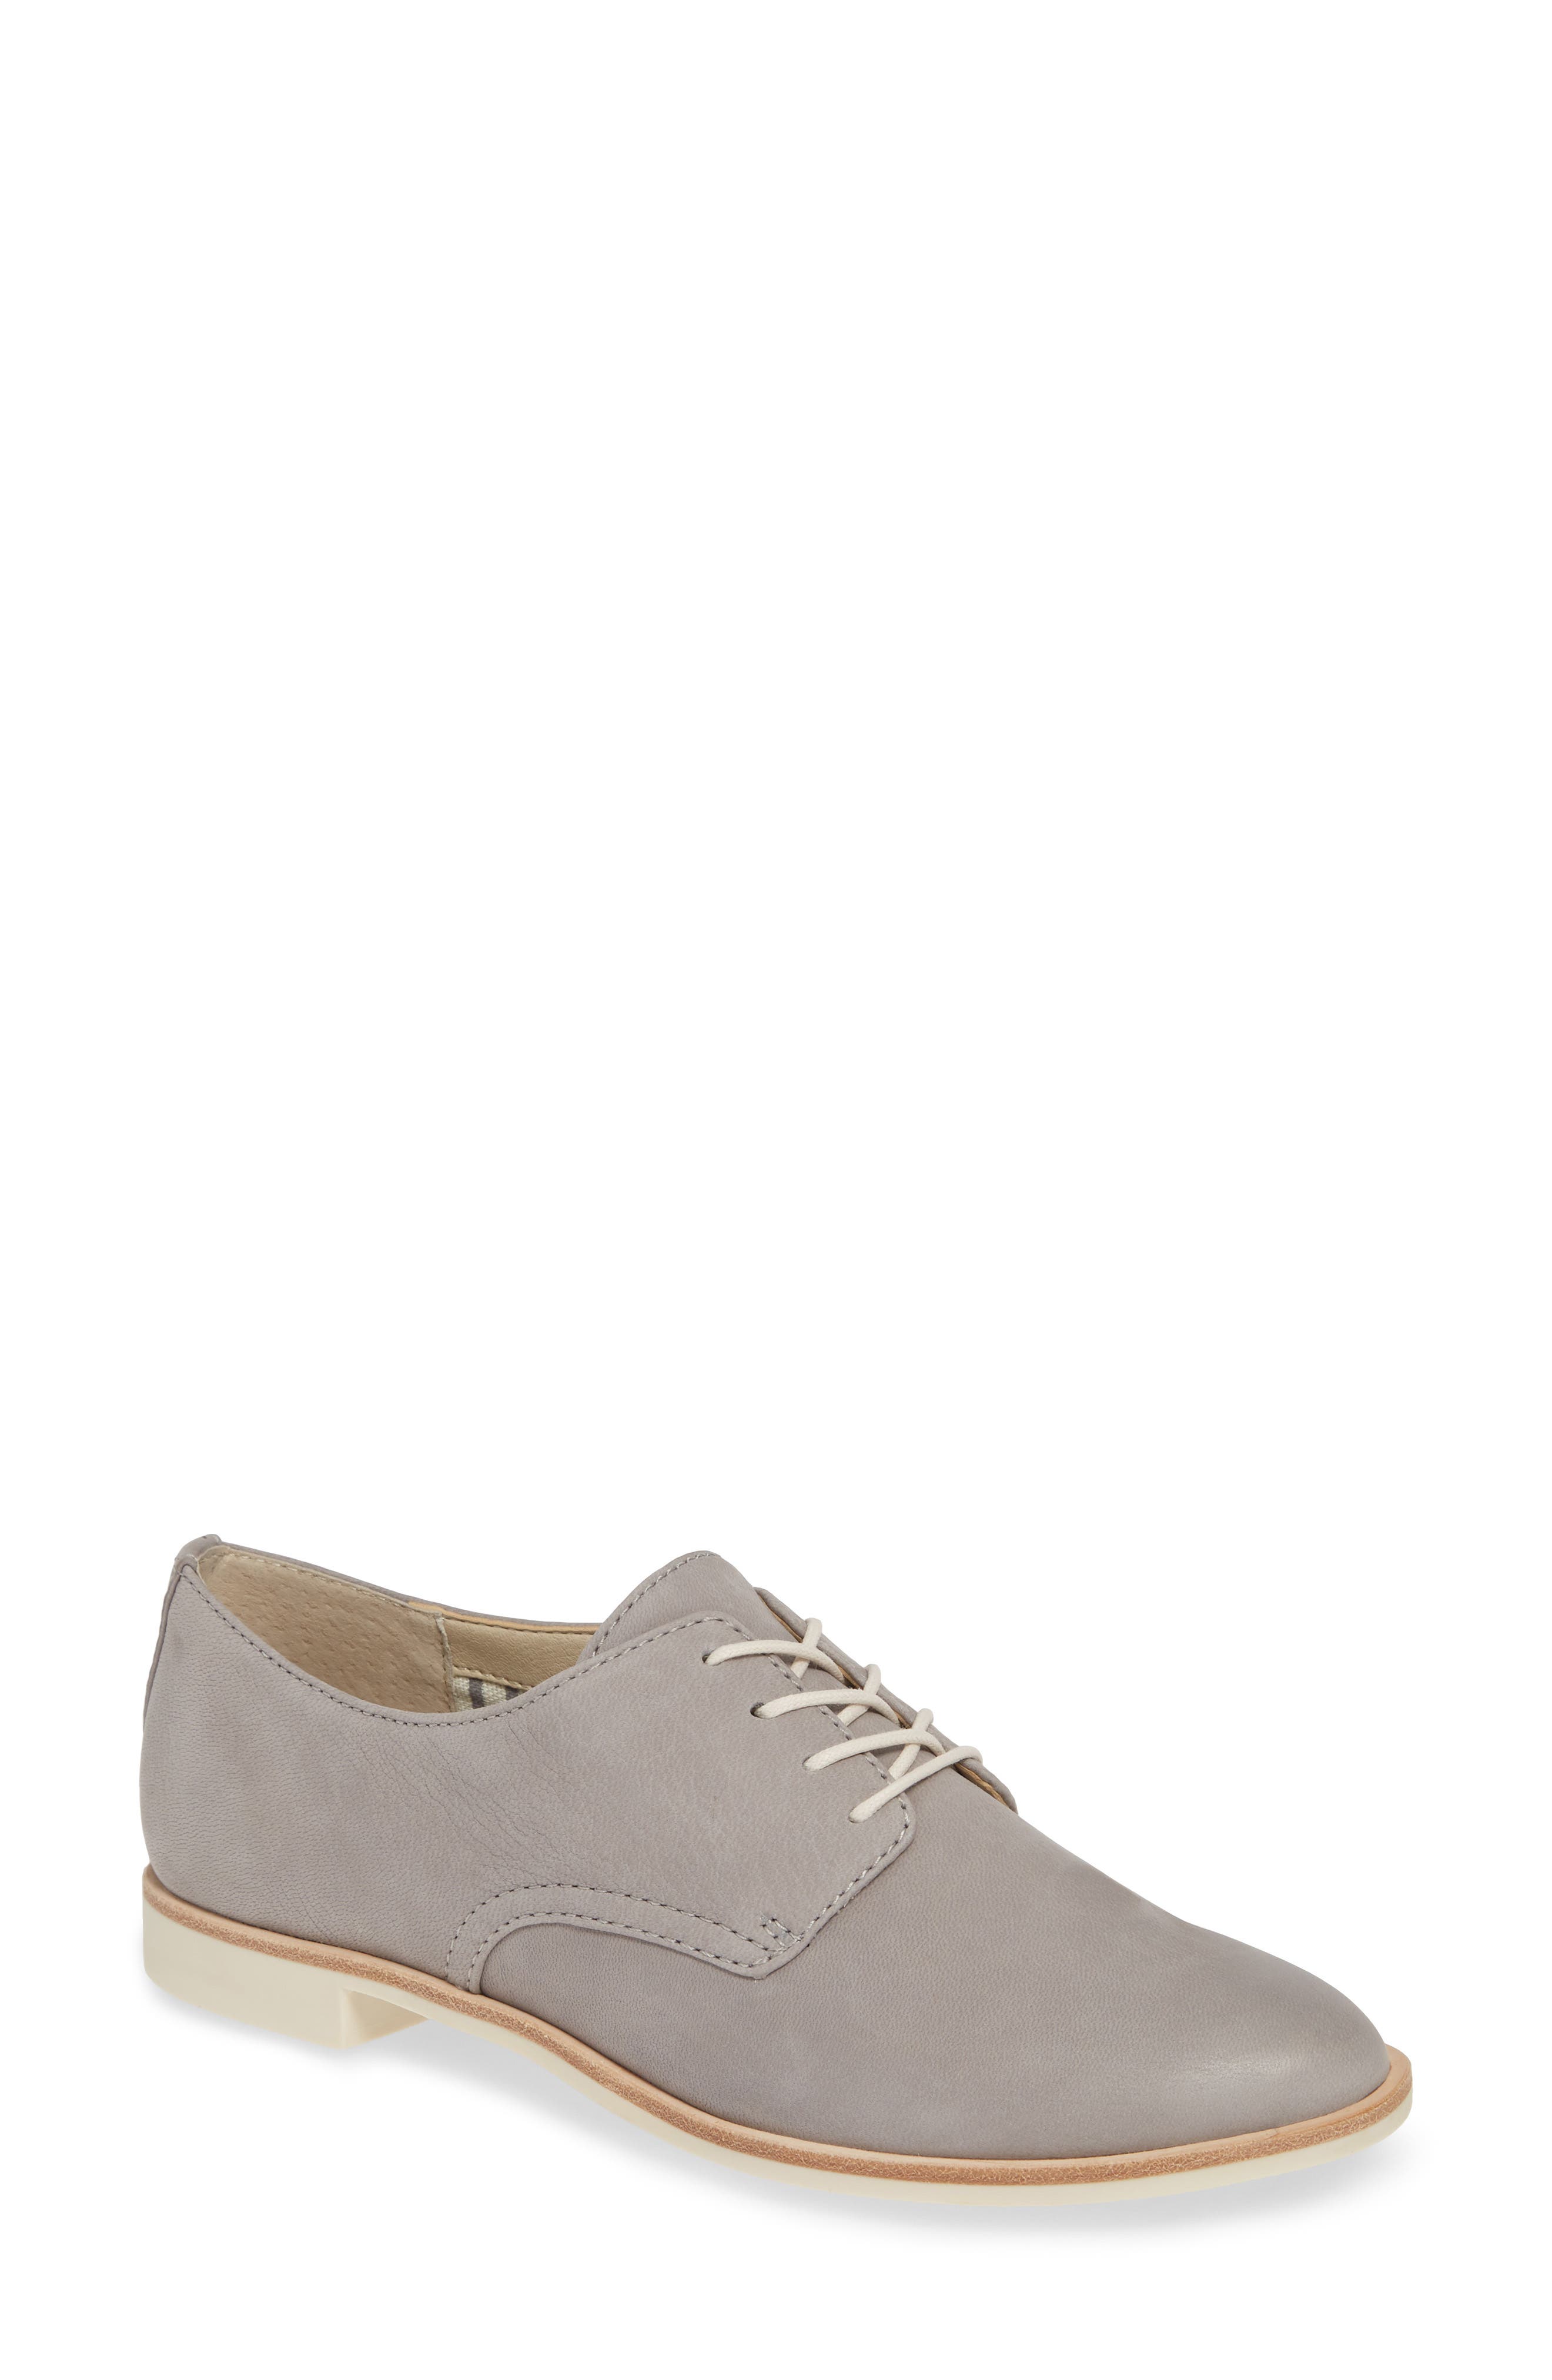 dolce vita kyle oxford loafers